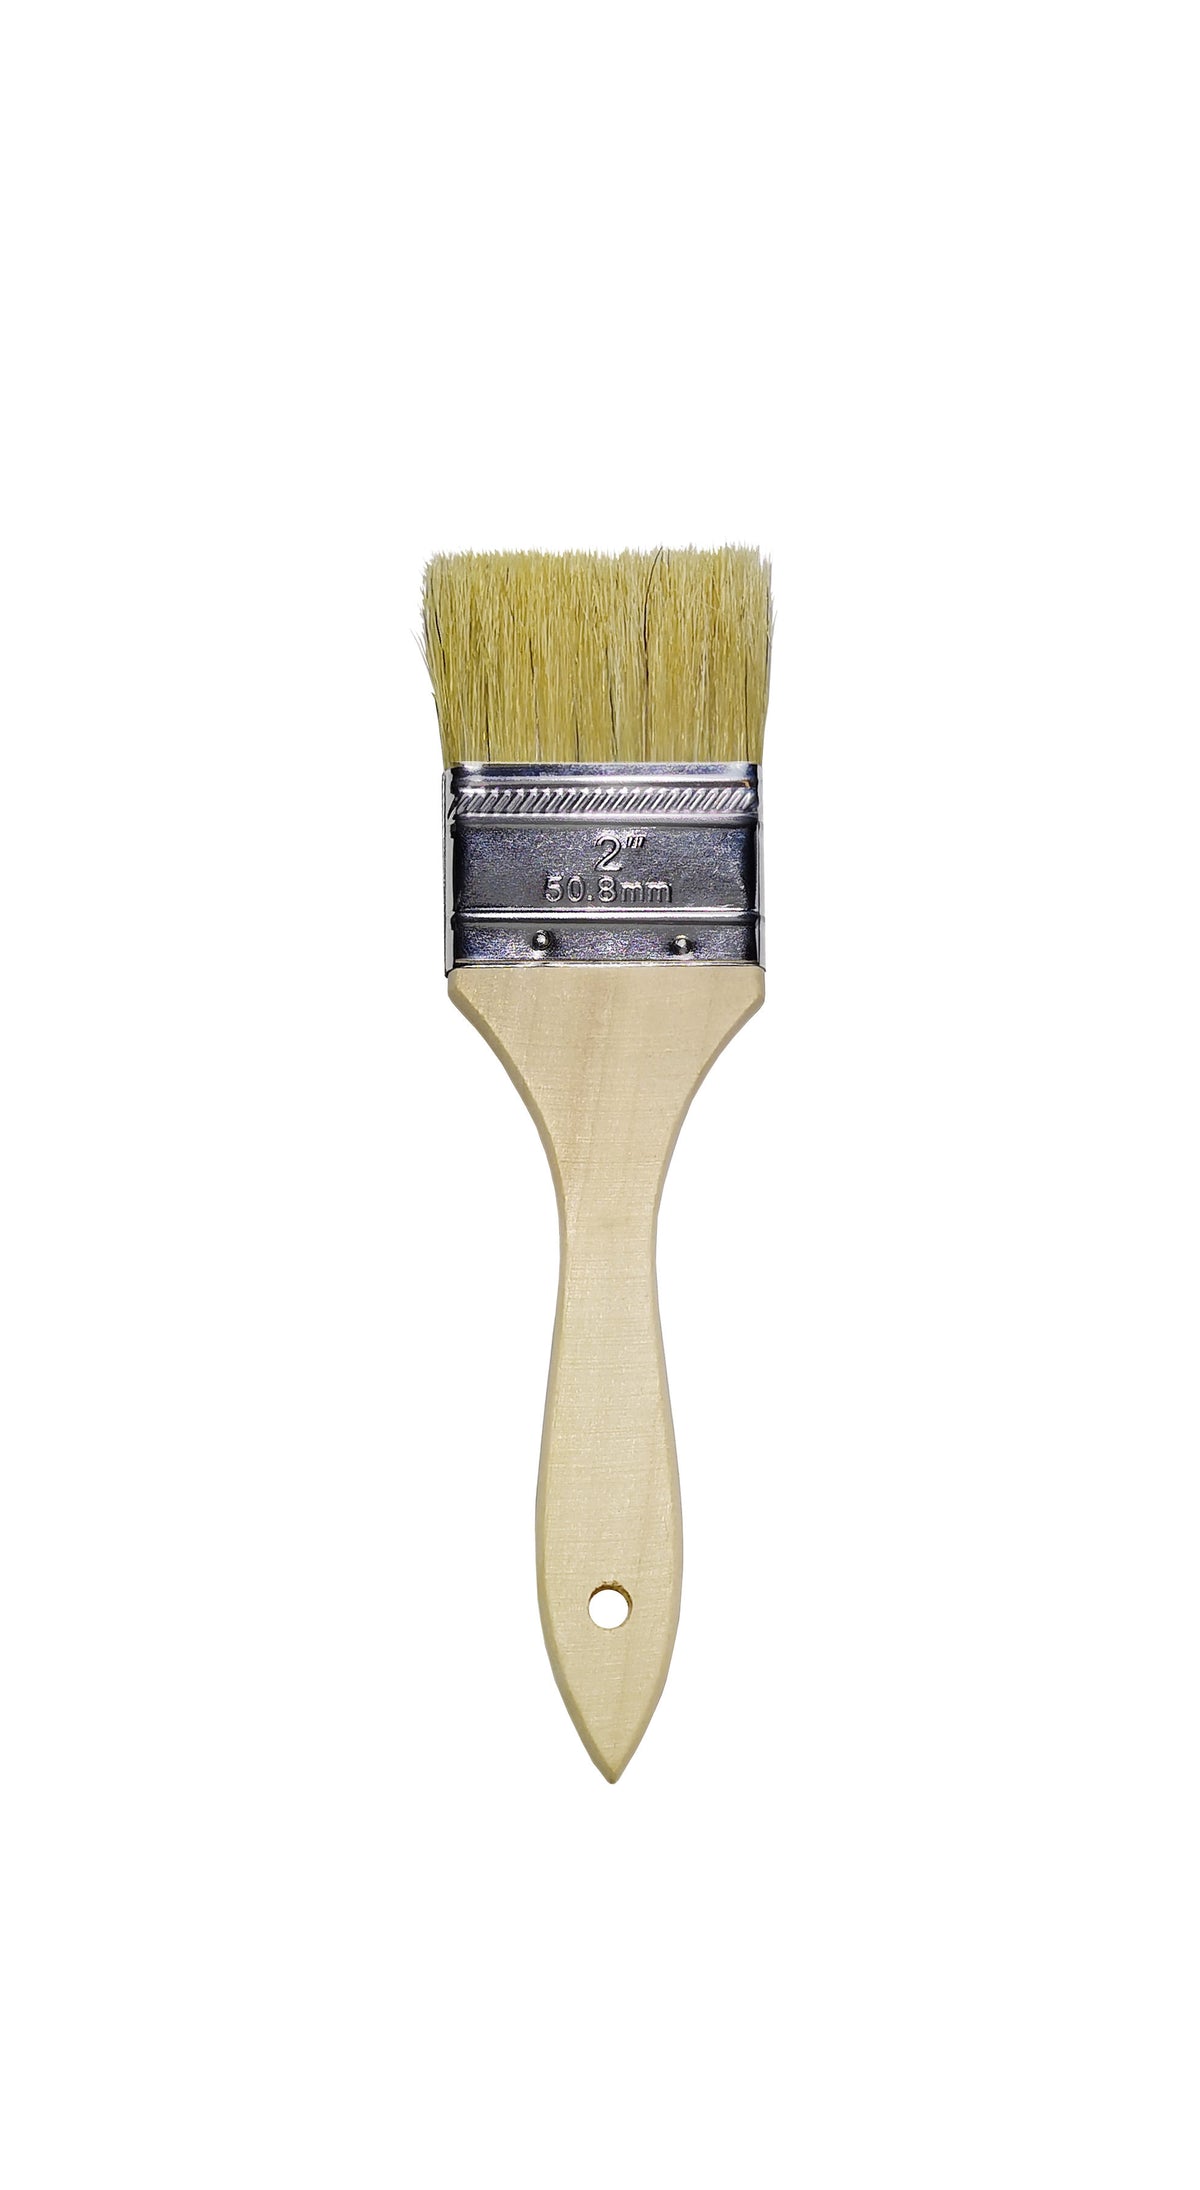 Natural Bristle Chip Brushes For Milk Paint